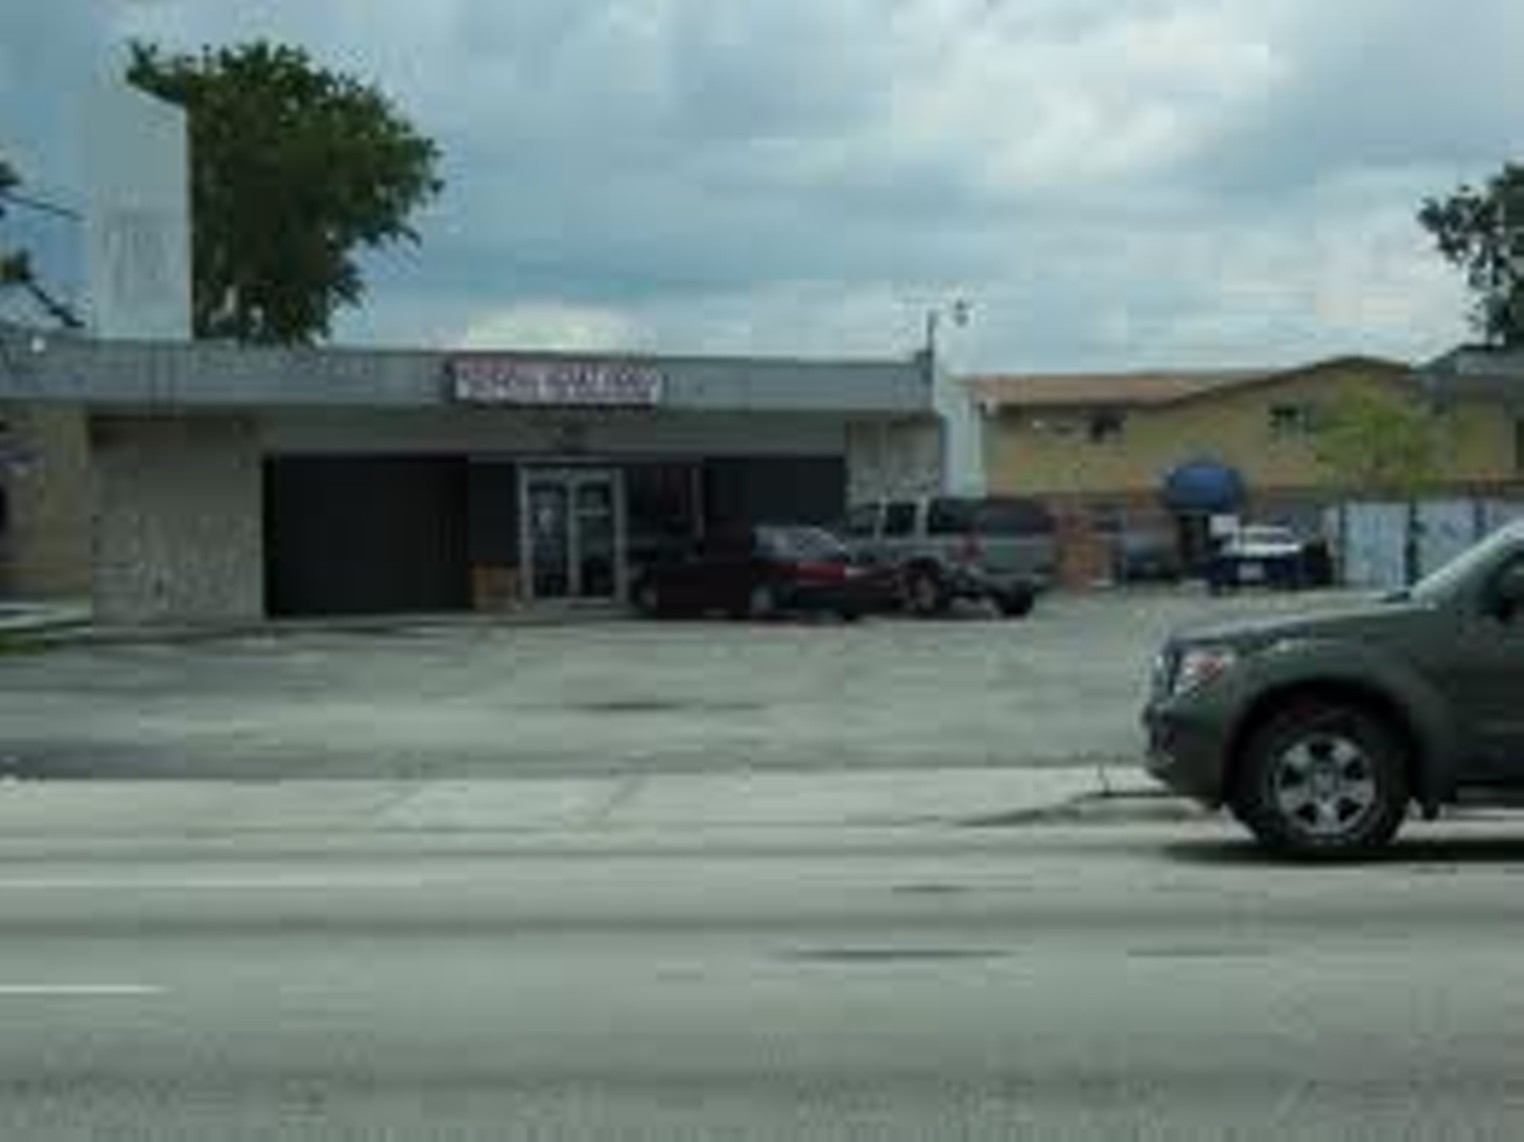 Best Adult Video Store 2008 Kendall Adult Video Best Restaurants, Bars, Clubs, Music and Stores in Miami Miami New Times photo